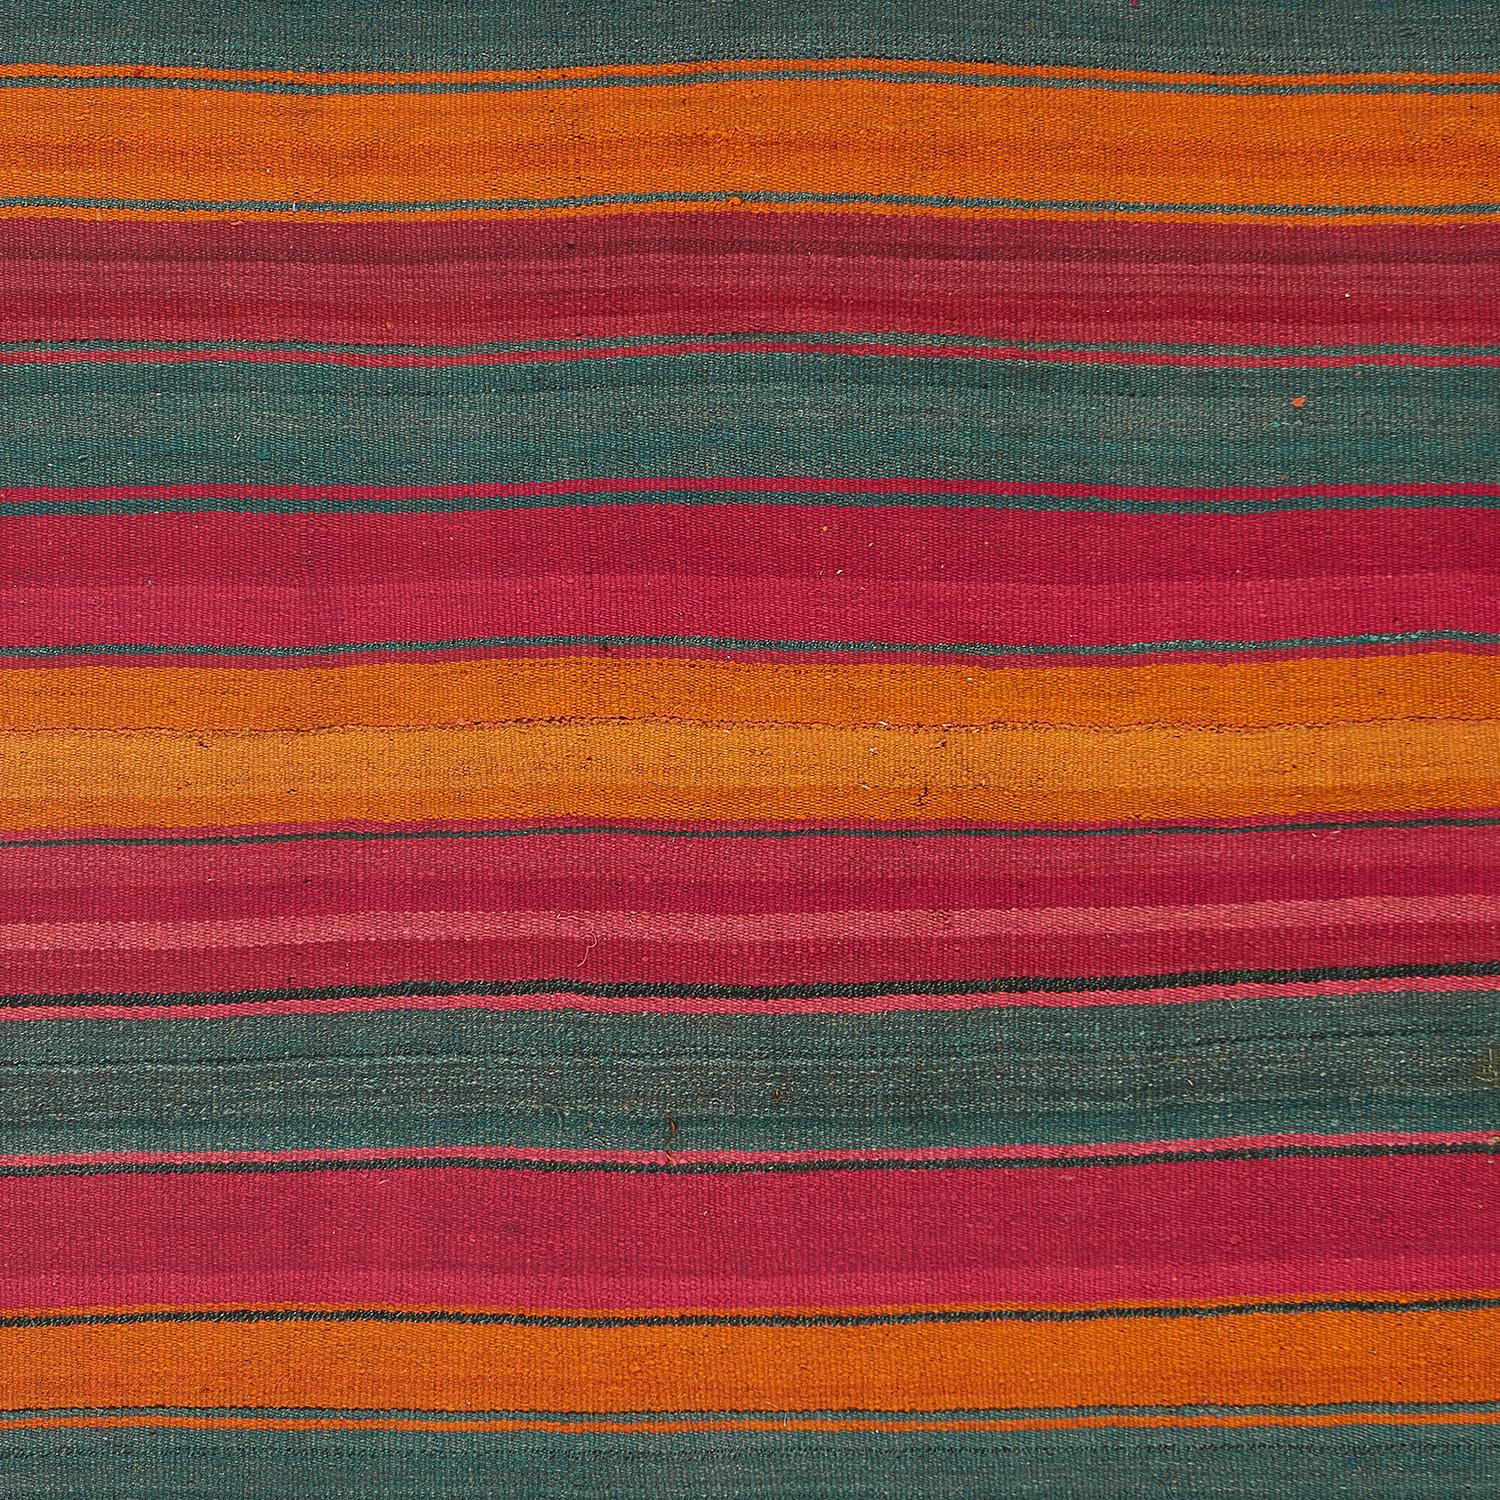 Bring vibrant energy into your home with Aires Vibrant Flatweave Rug 4'8